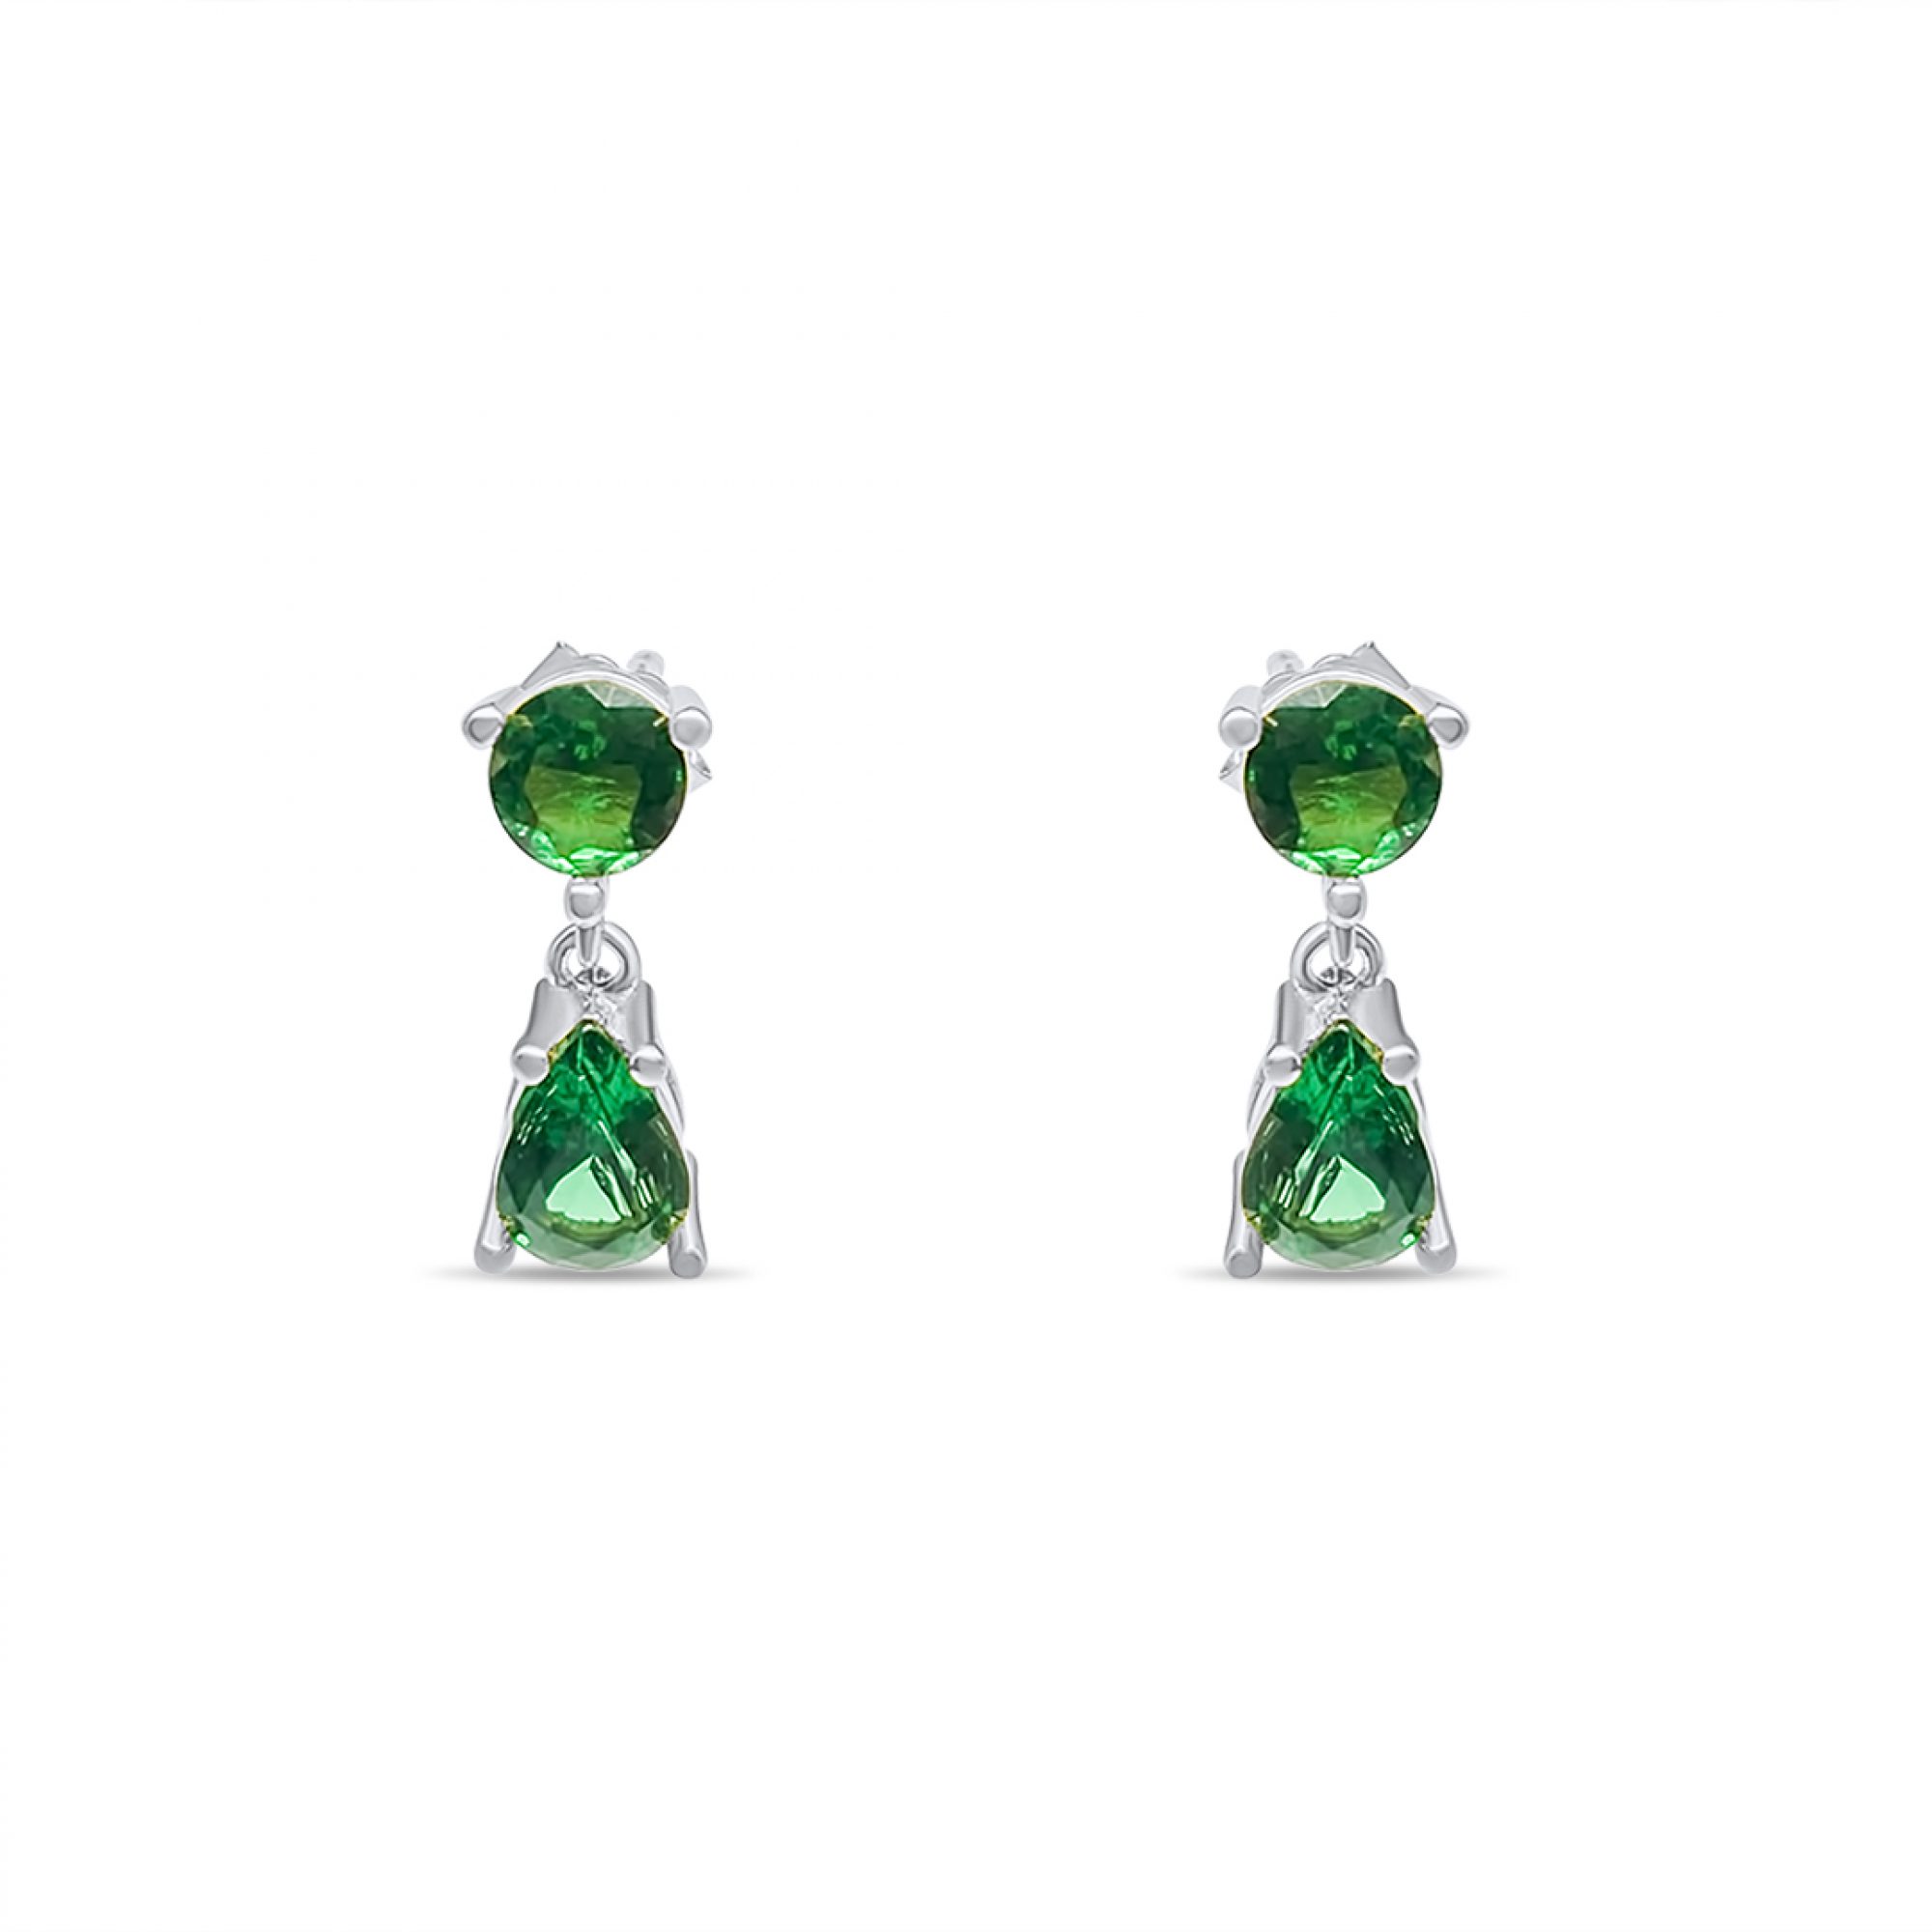 Silver earrings with emerald stones